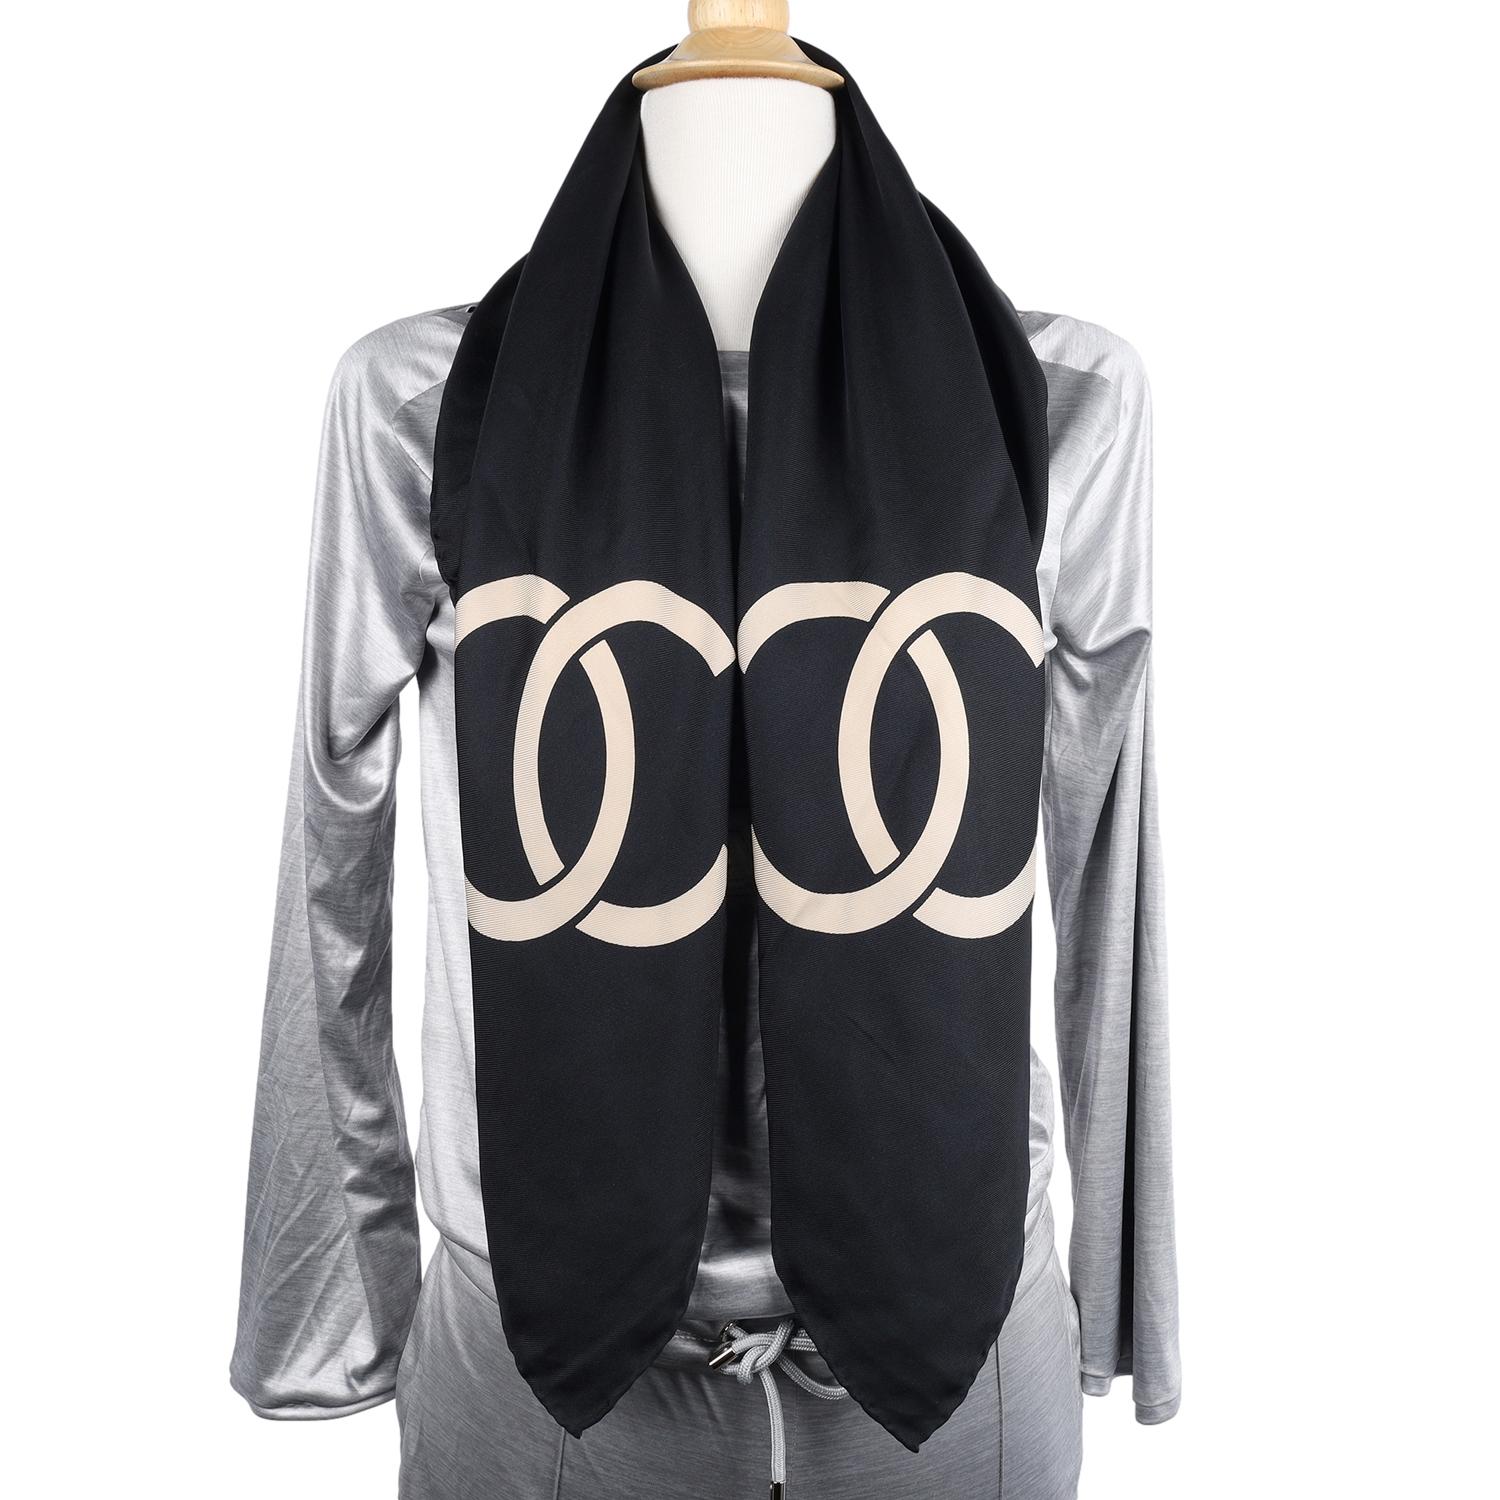 Authentic Chanel CC Logo silk scarf in beige and black. Rare, a must-have. Very beautiful! 
This effortlessly elegant silk scarf wrap literally envelops you in a blanket of delicate softness. The iconic pattern has been revitalized with hints of pop